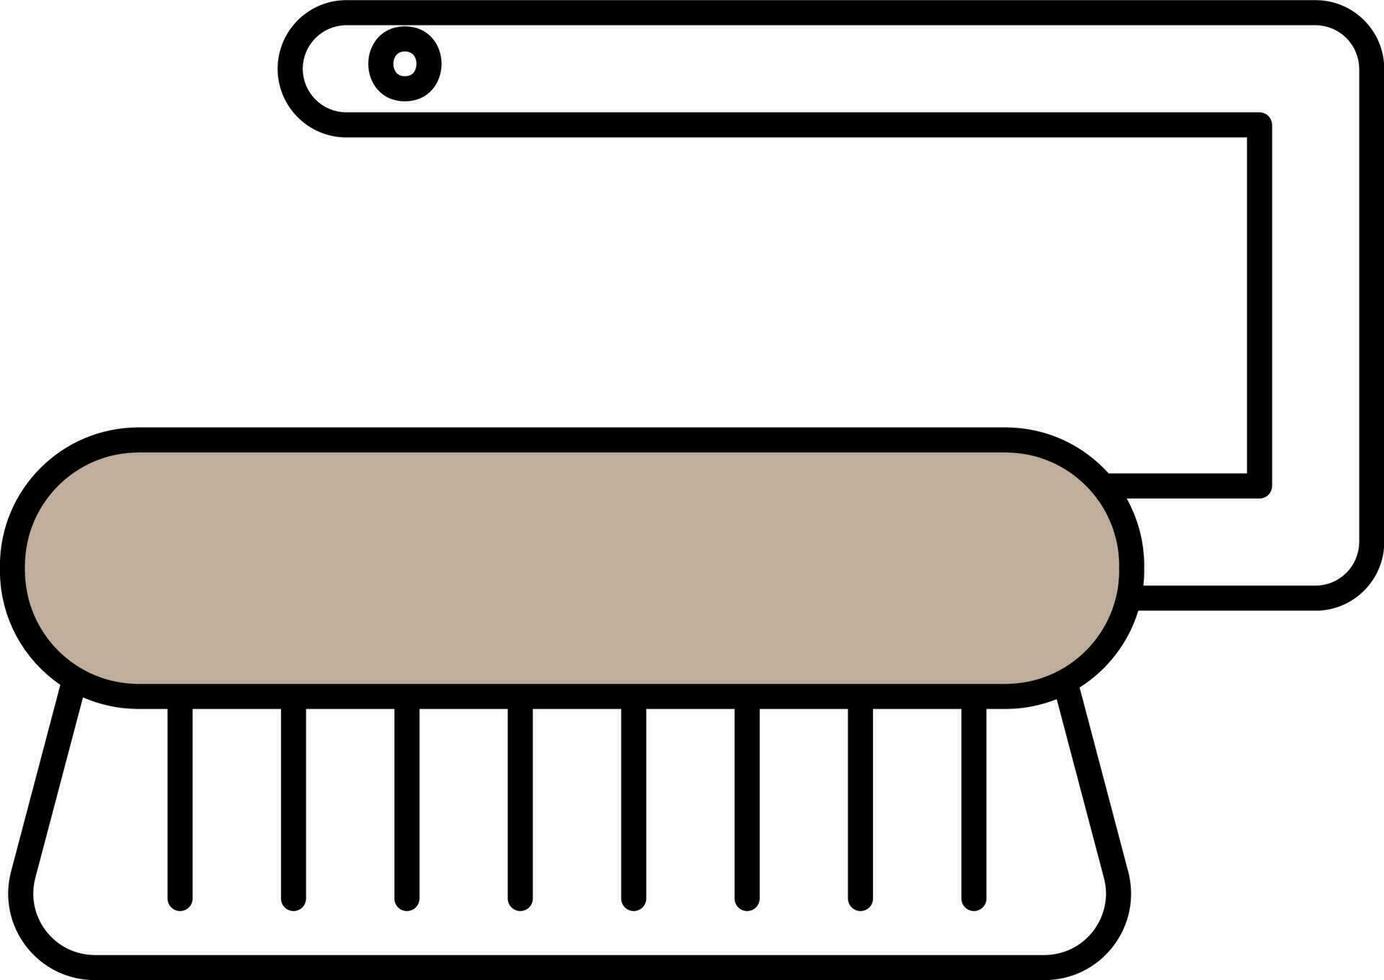 Cleaning Brush Flat Icon In Grey And White Color. vector